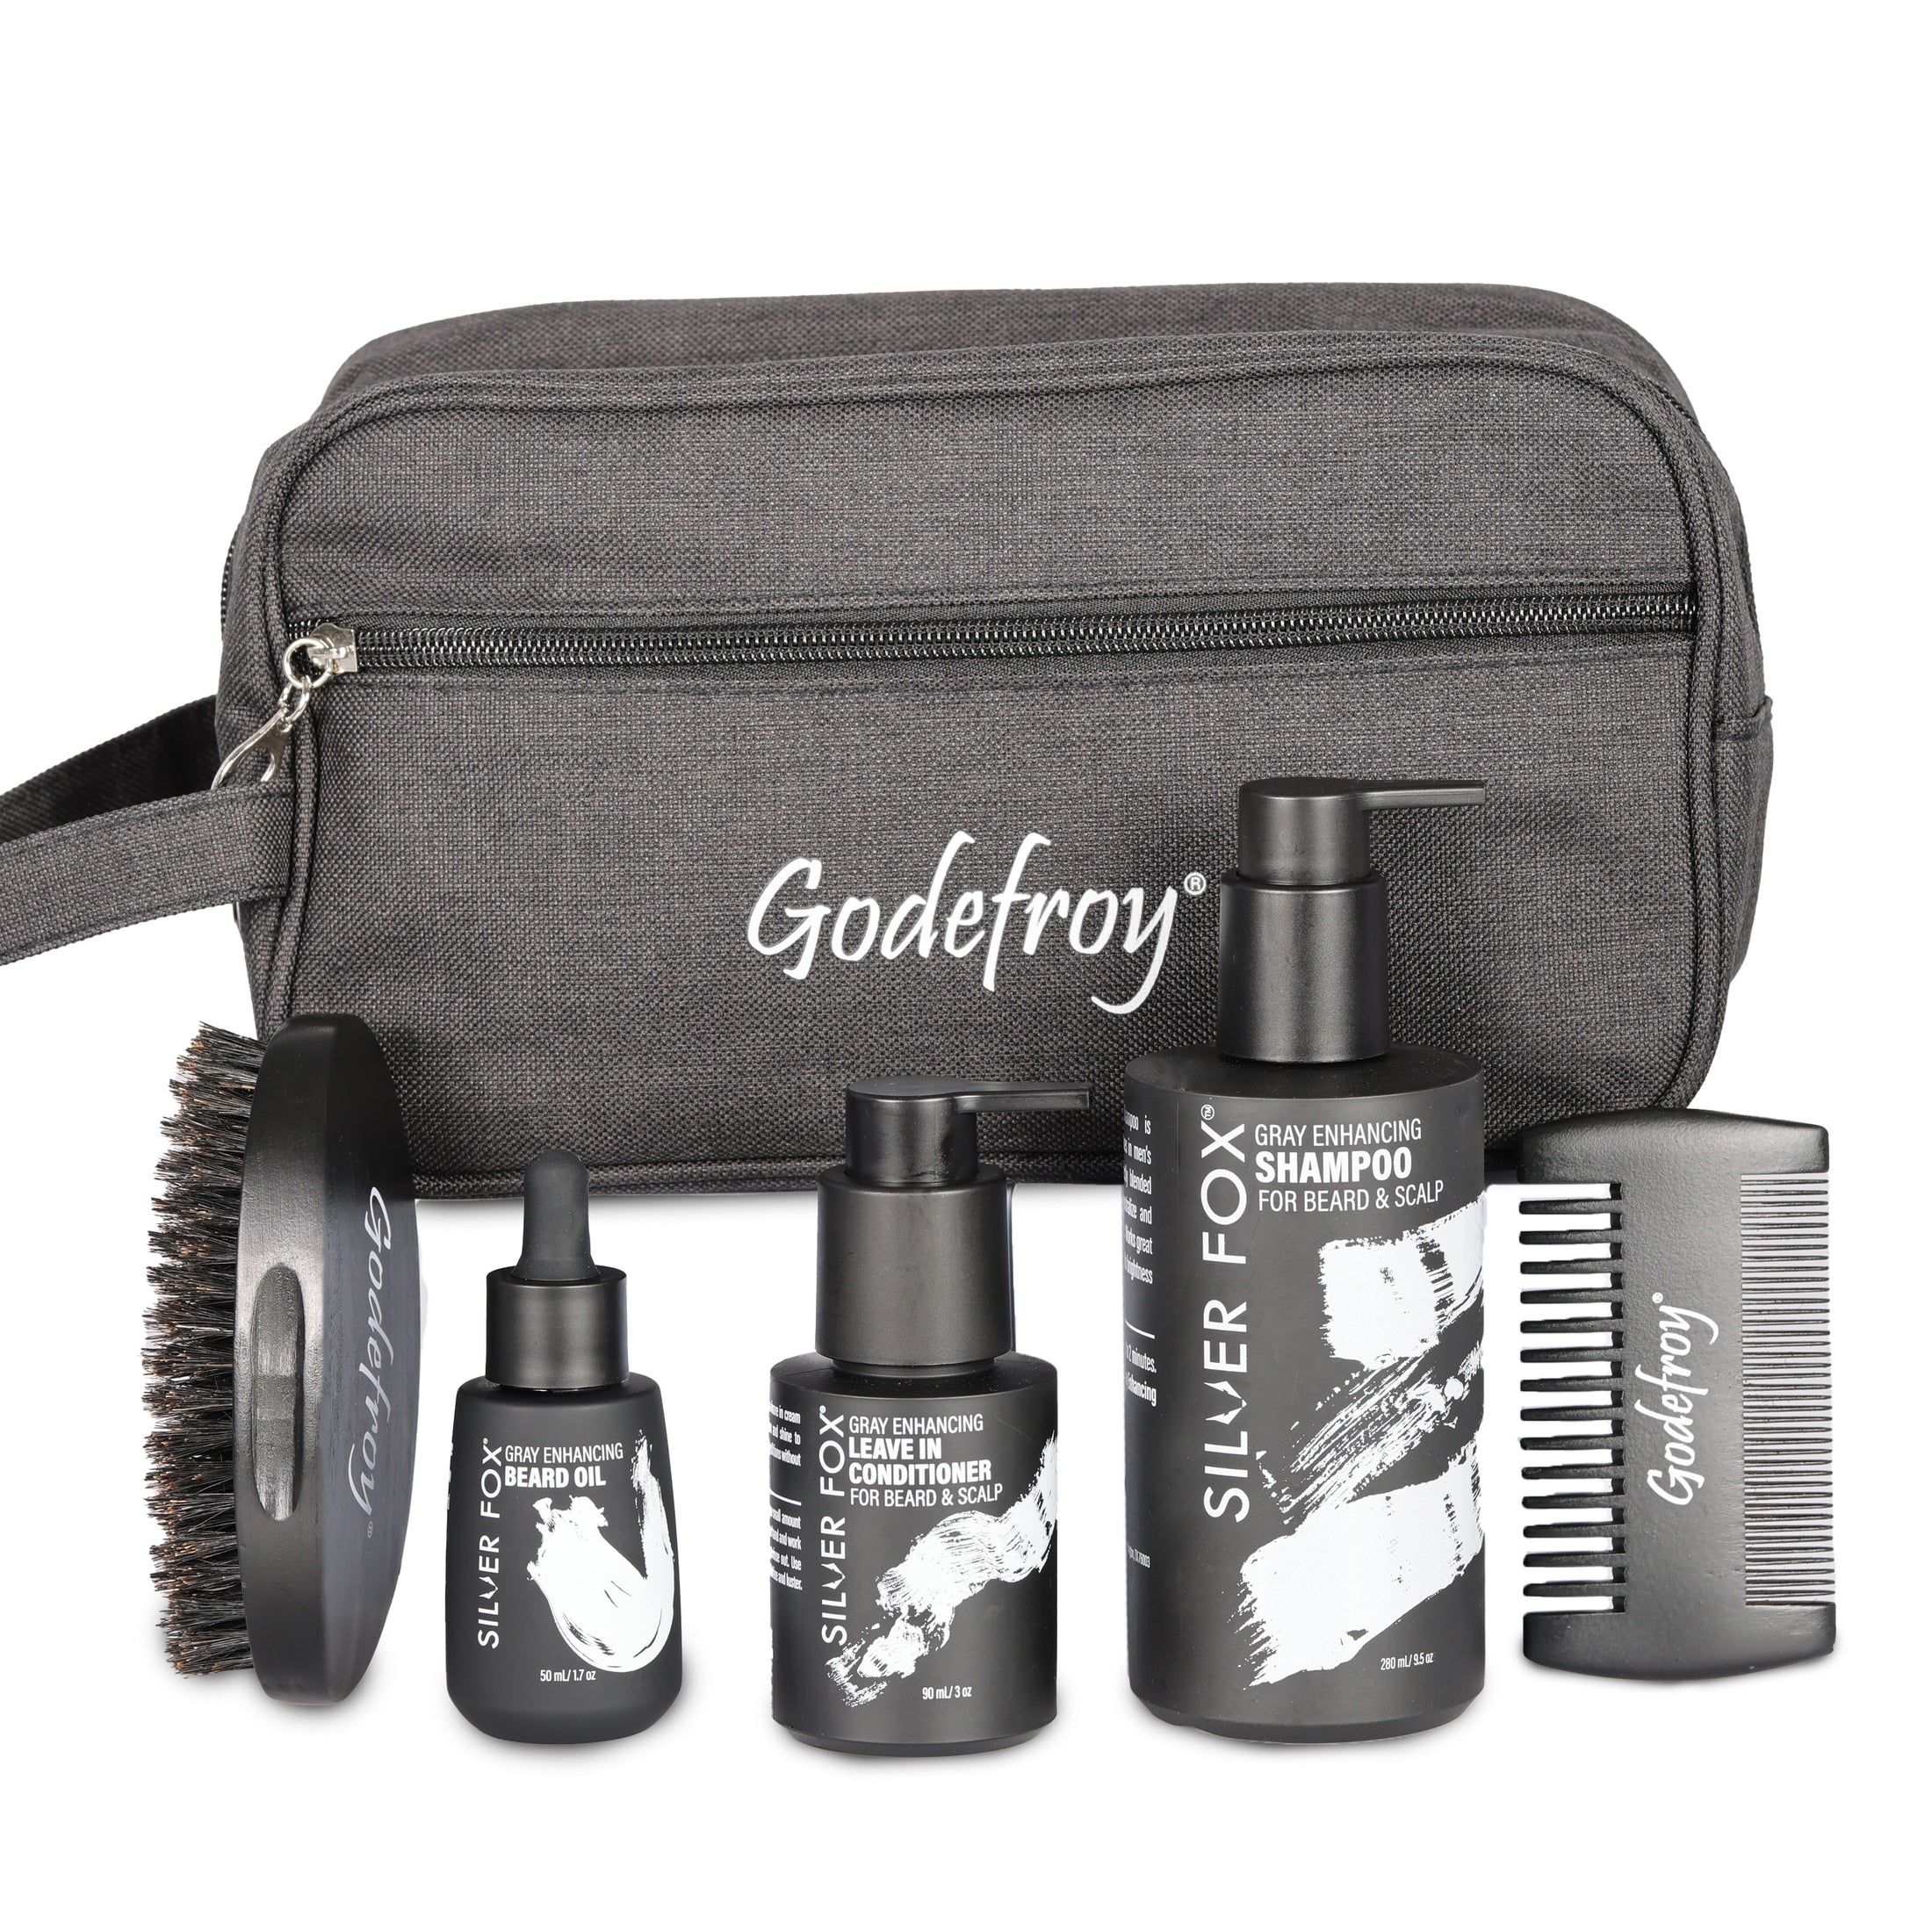 toiletry godefroy bag with silver fox products 